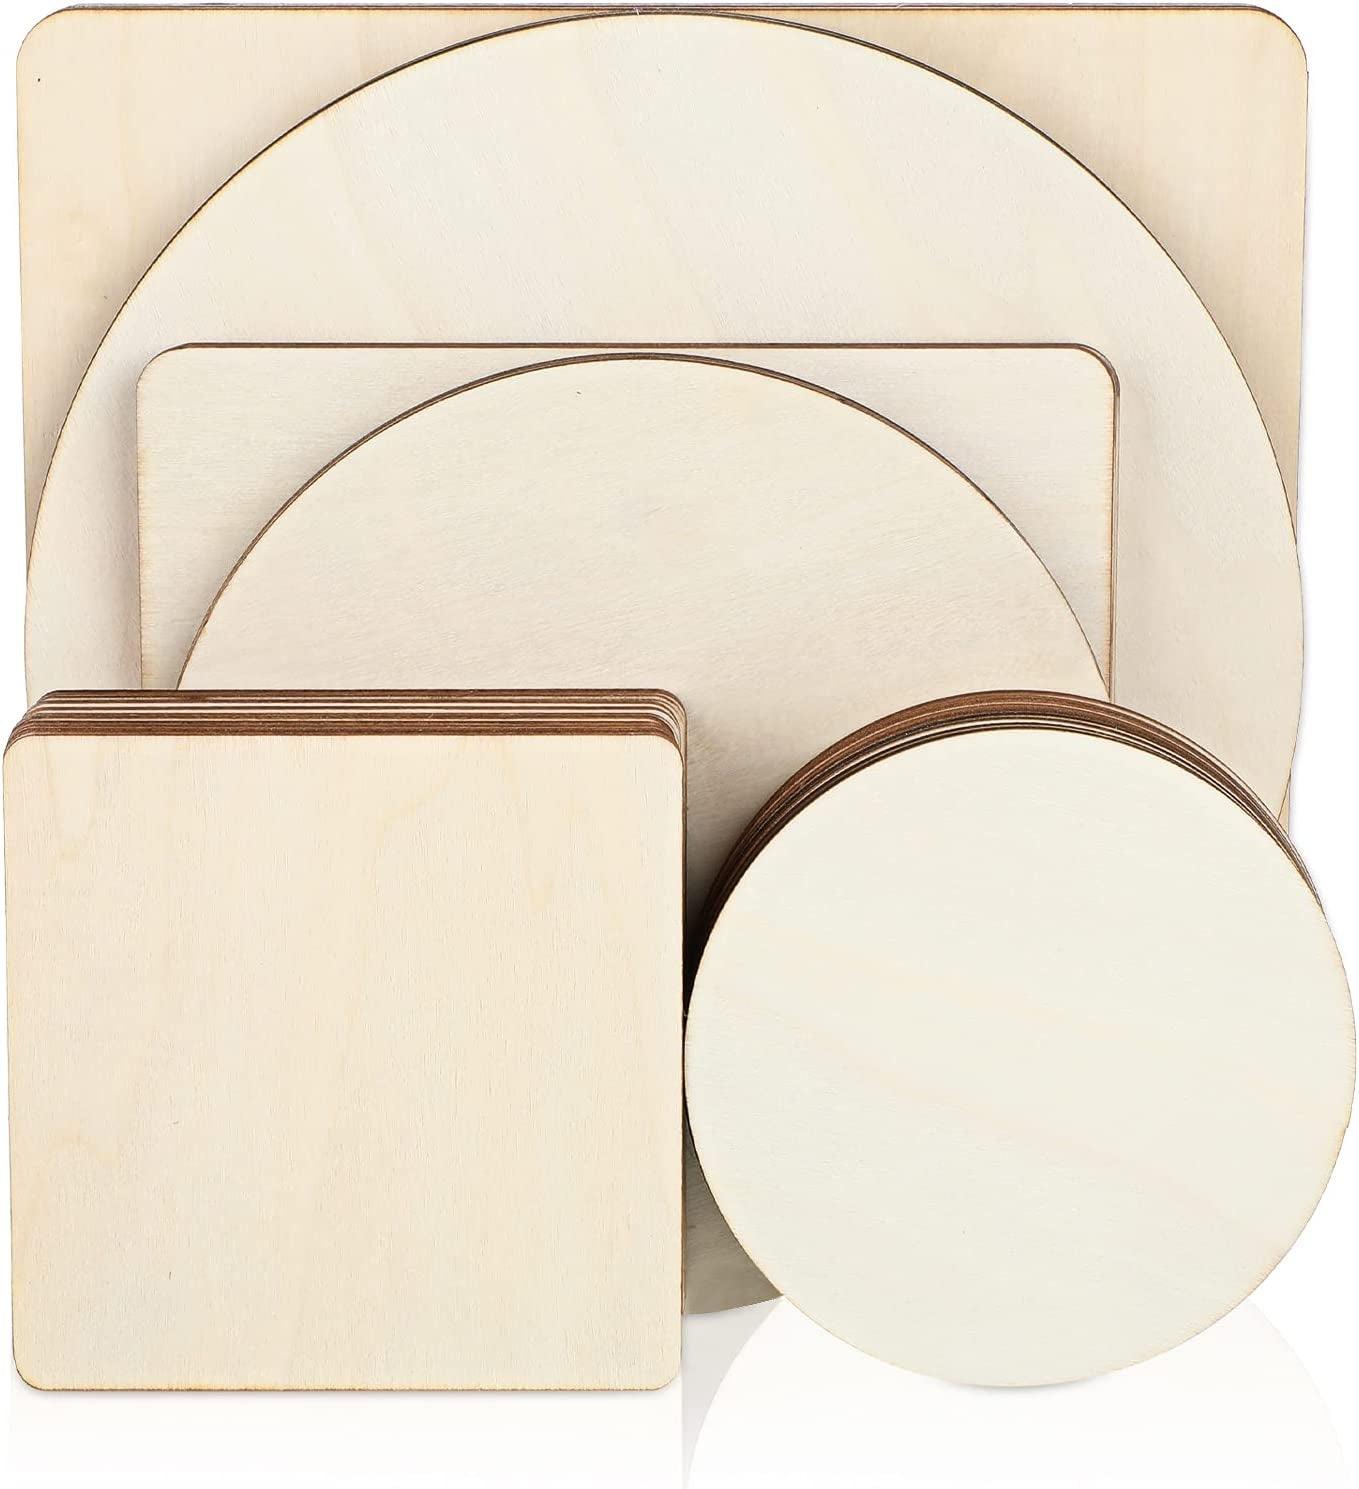 32 Pieces Unfinished Blank Wood Pieces Squares Crafts Natural Cutouts Tiles round Circles DIY Discs for 3 Sizes - WoodArtSupply